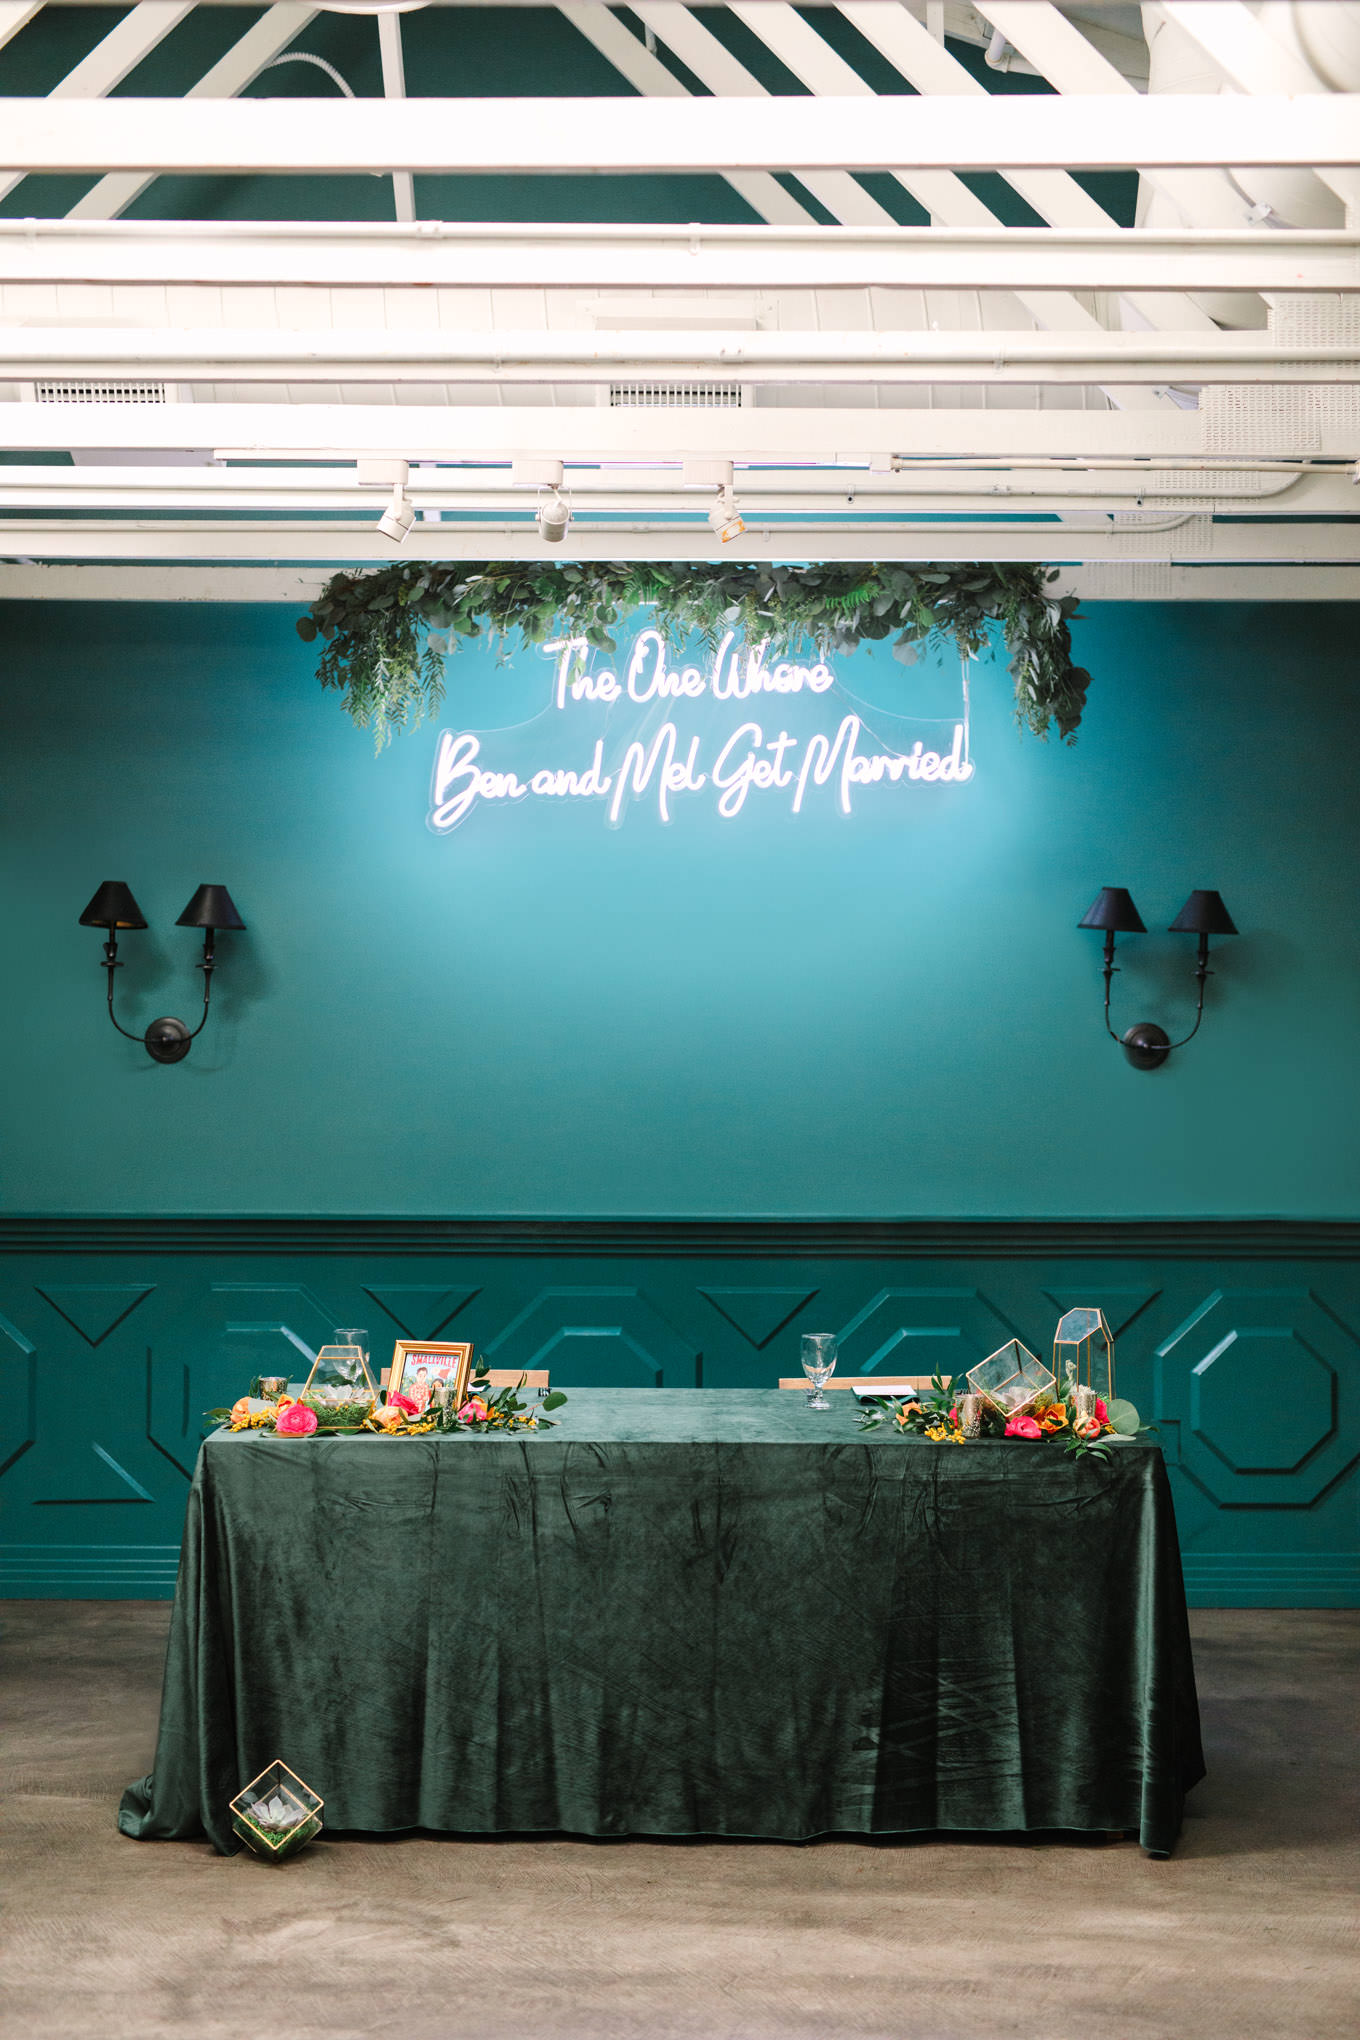 Bride and groom's sweetheart table with neon sign | TV inspired wedding at The Fig House Los Angeles | Published on The Knot | Fresh and colorful photography for fun-loving couples in Southern California | #losangeleswedding #TVwedding #colorfulwedding #theknot   Source: Mary Costa Photography | Los Angeles wedding photographer